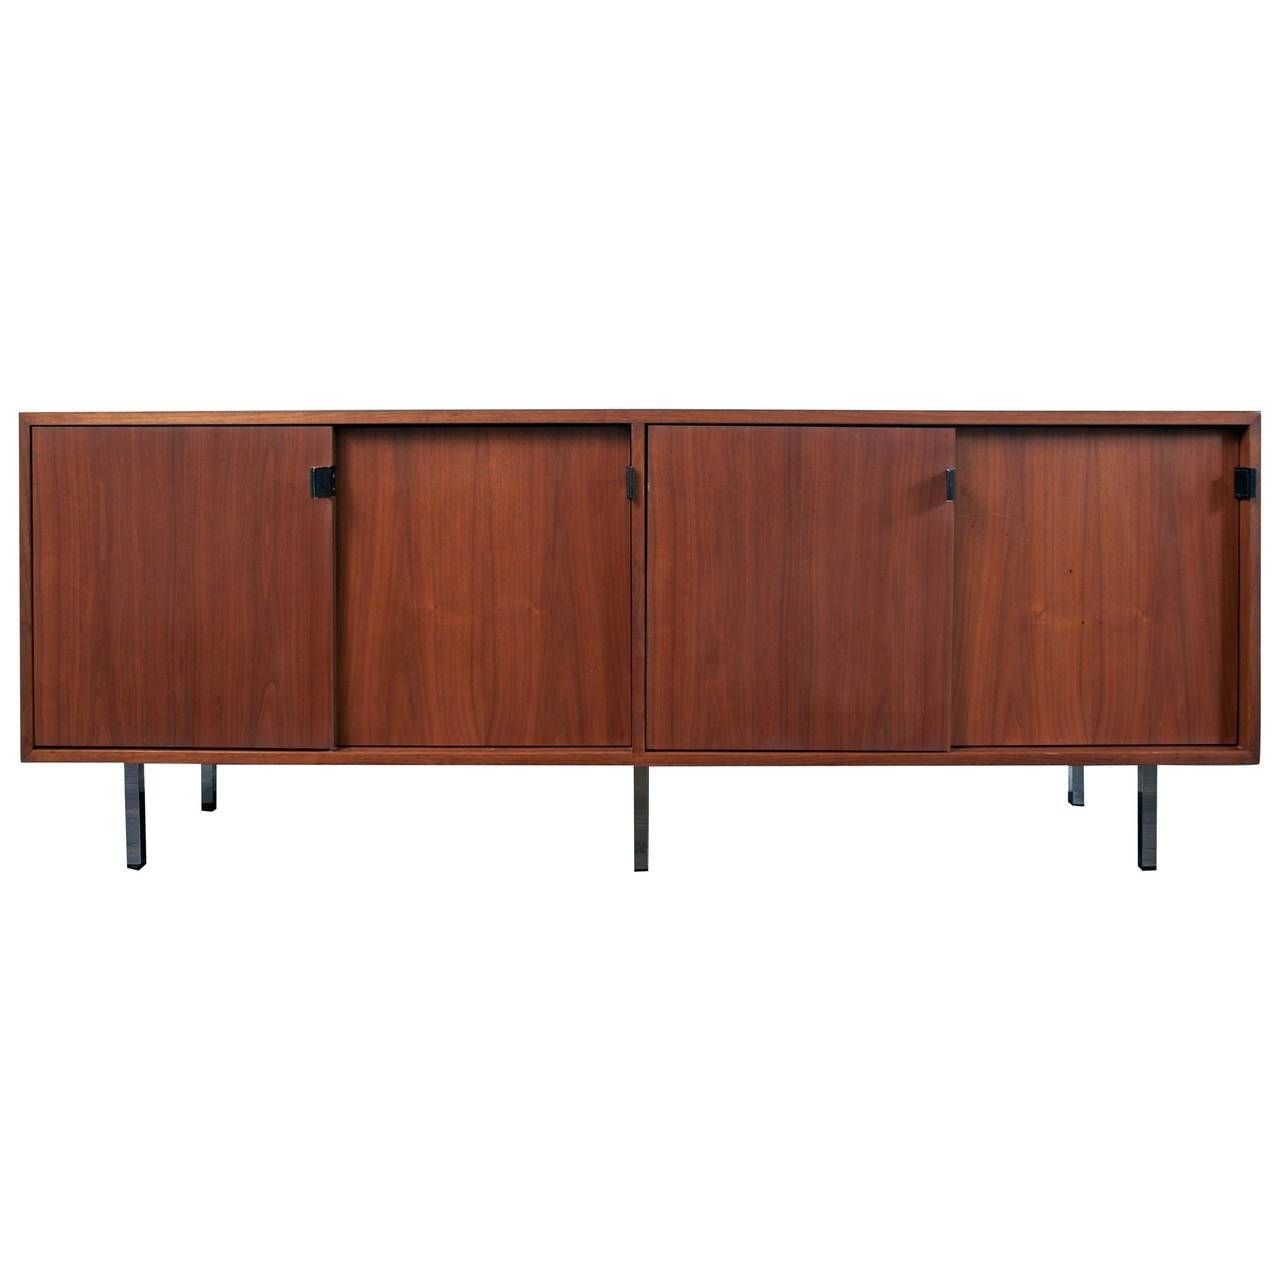 Florence Knoll Credenza Walnut Sideboard For Sale At 1stdibs Pertaining To Most Recent Florence Knoll Sideboards (View 7 of 15)